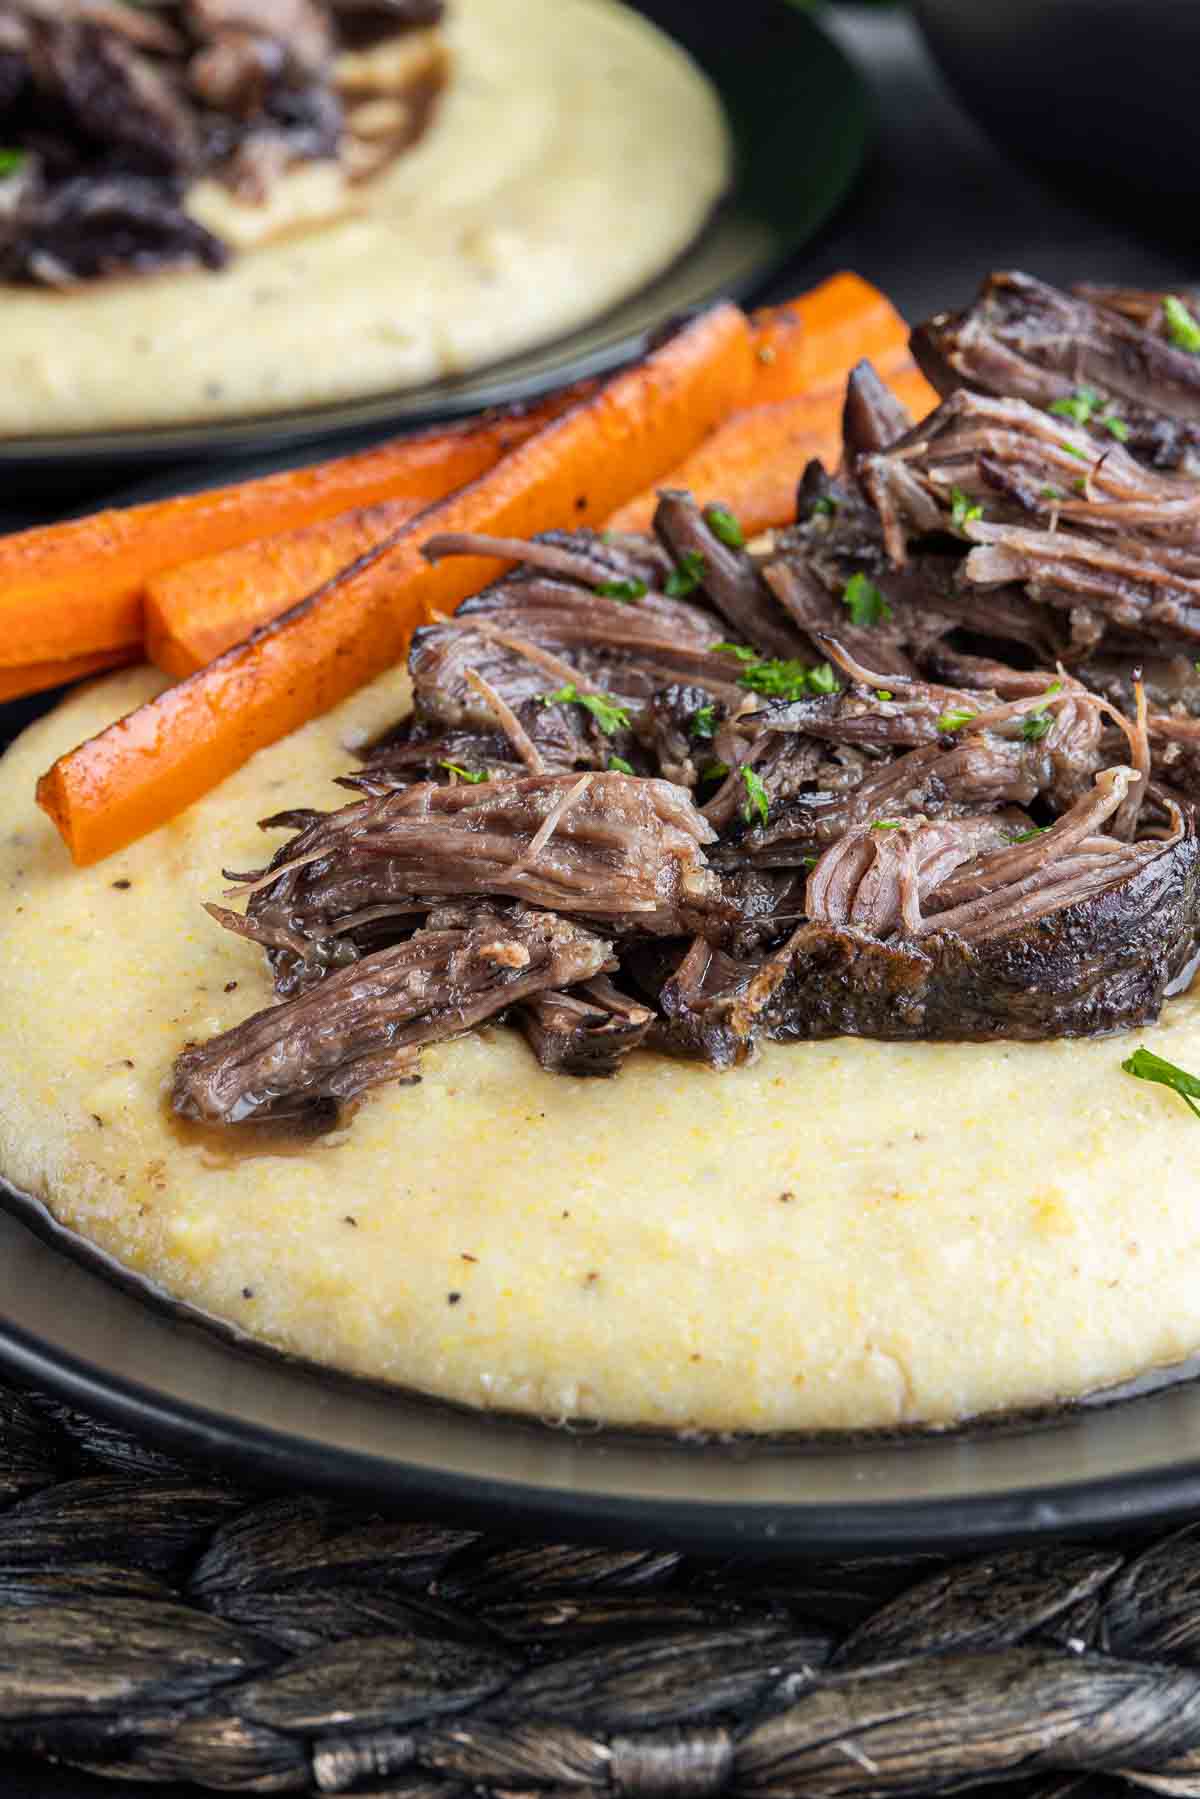 Creamy Polenta and braised shorts ribs with roasted carrots